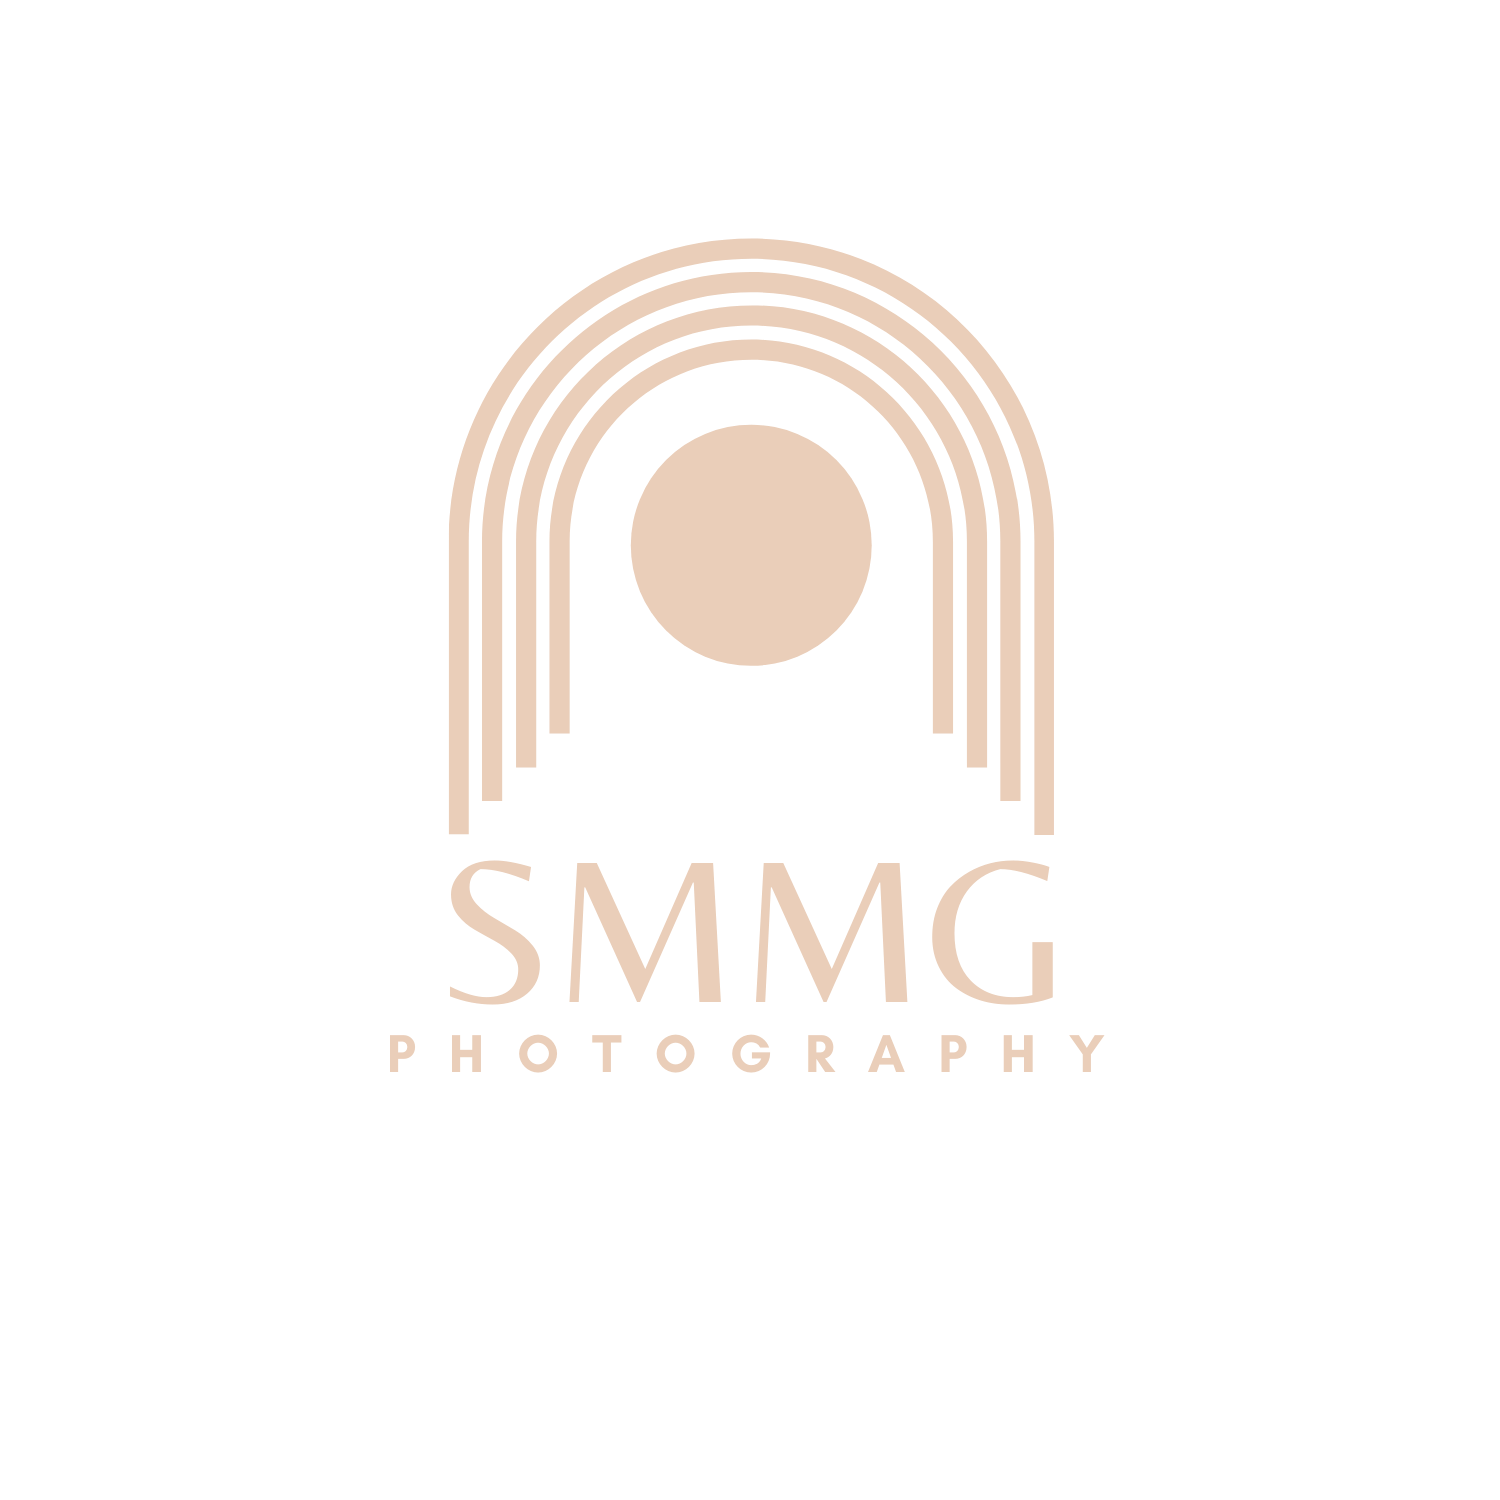 SMMG Photography